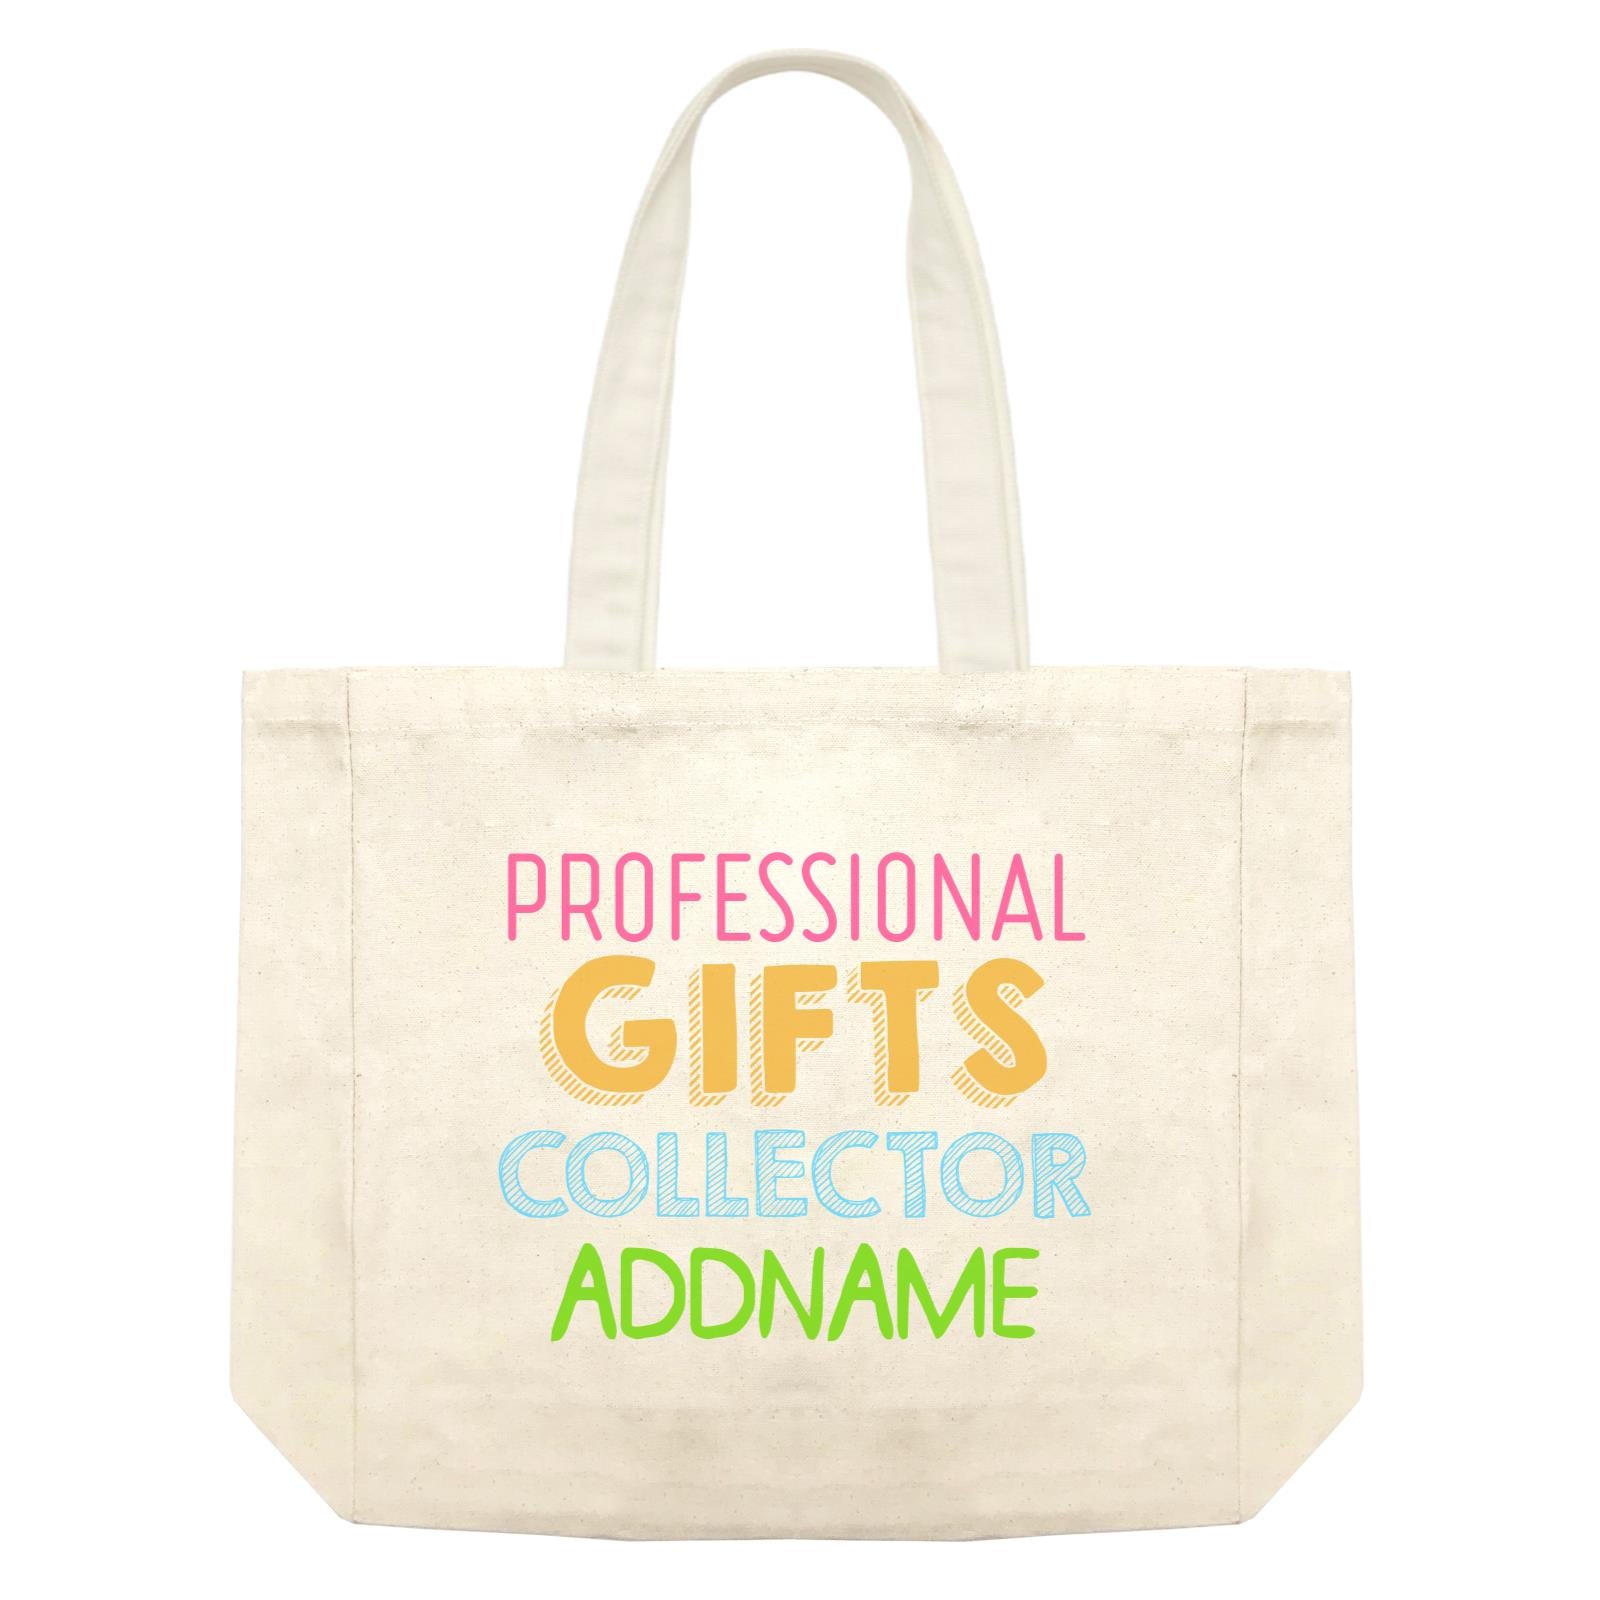 Professional Gifts Collector Addname Shopping Bag